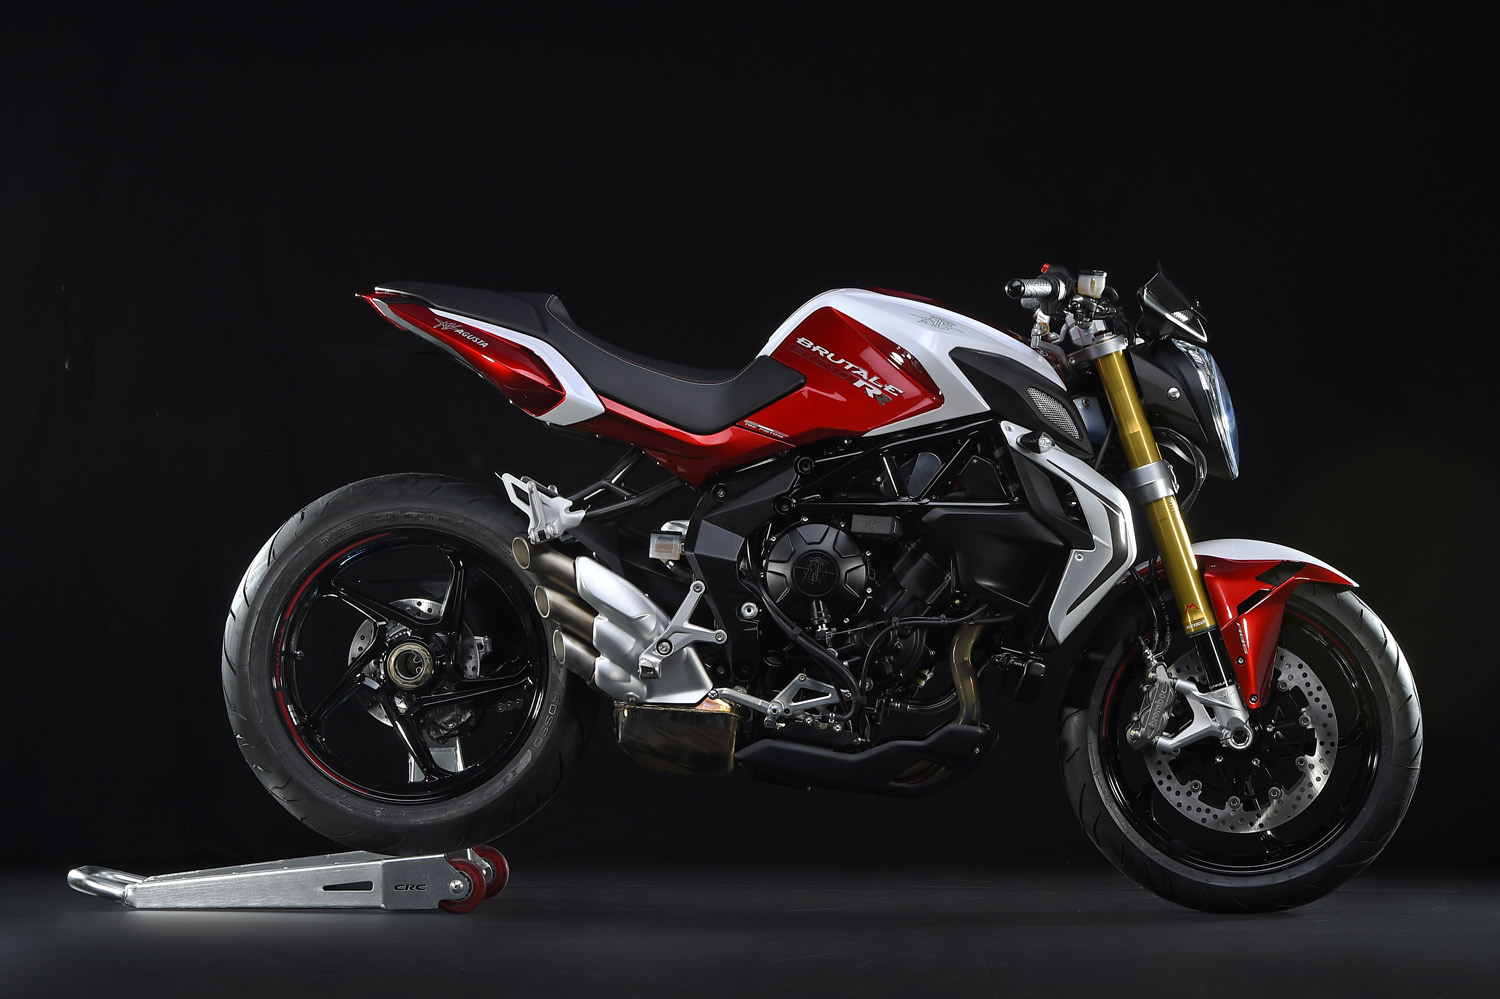 HQ Agusta Brutale 800 Wallpapers | File 217.91Kb